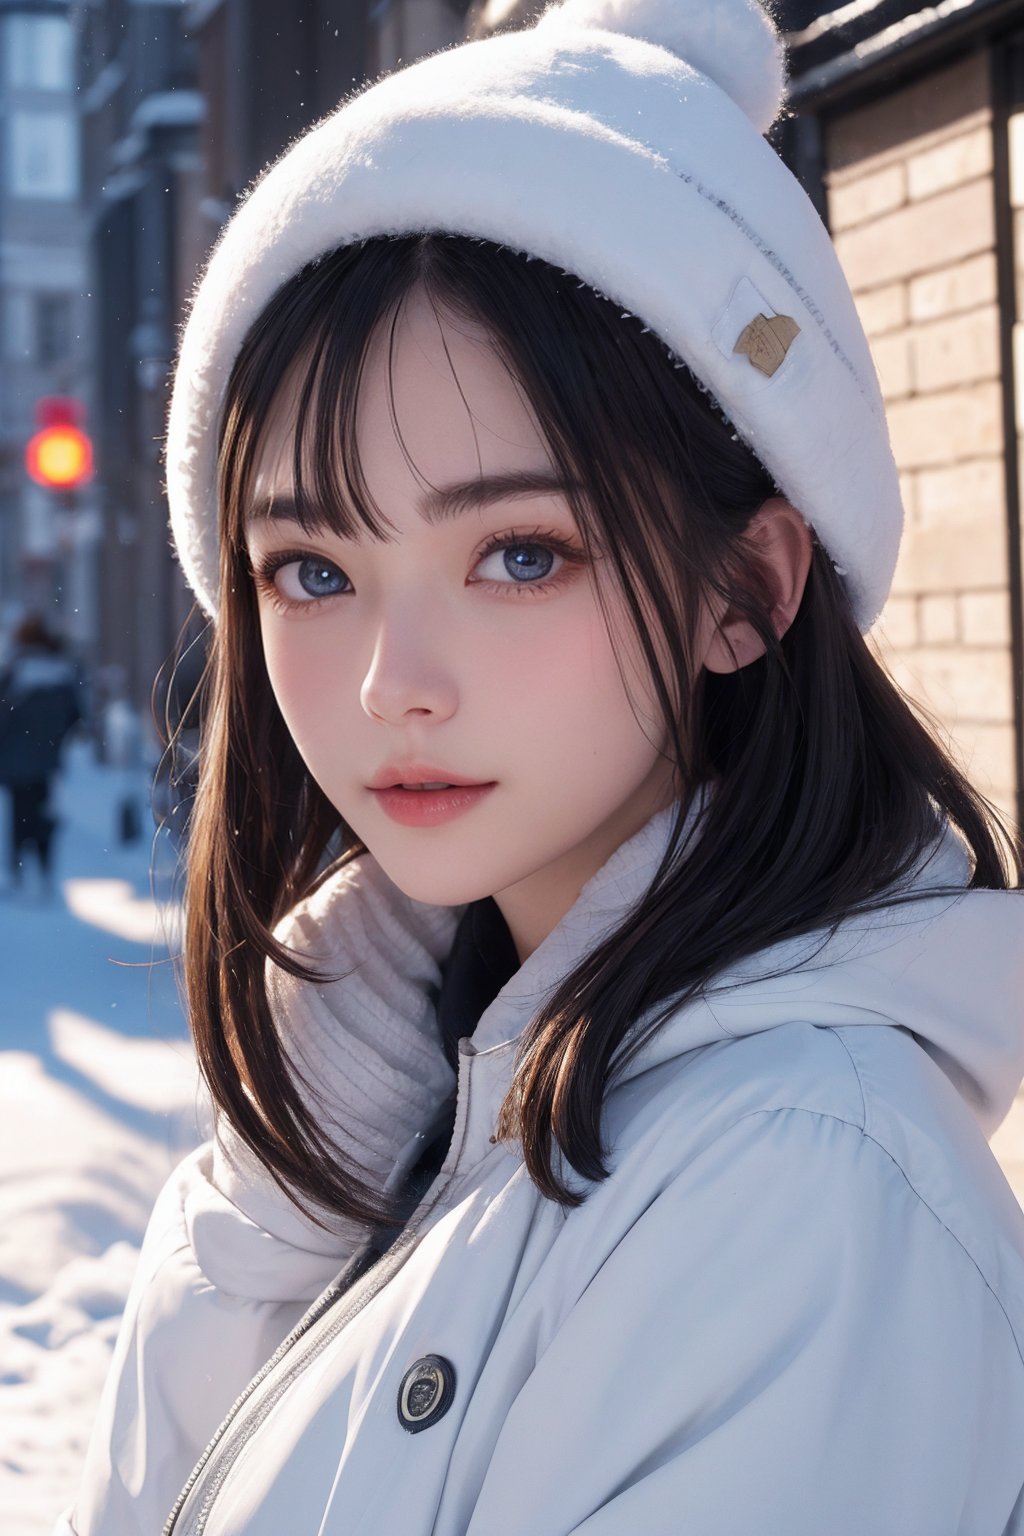 8k, ultra highres, real light and shadow, beautiful eyes, beautiful women, in the snow scene in winter, street